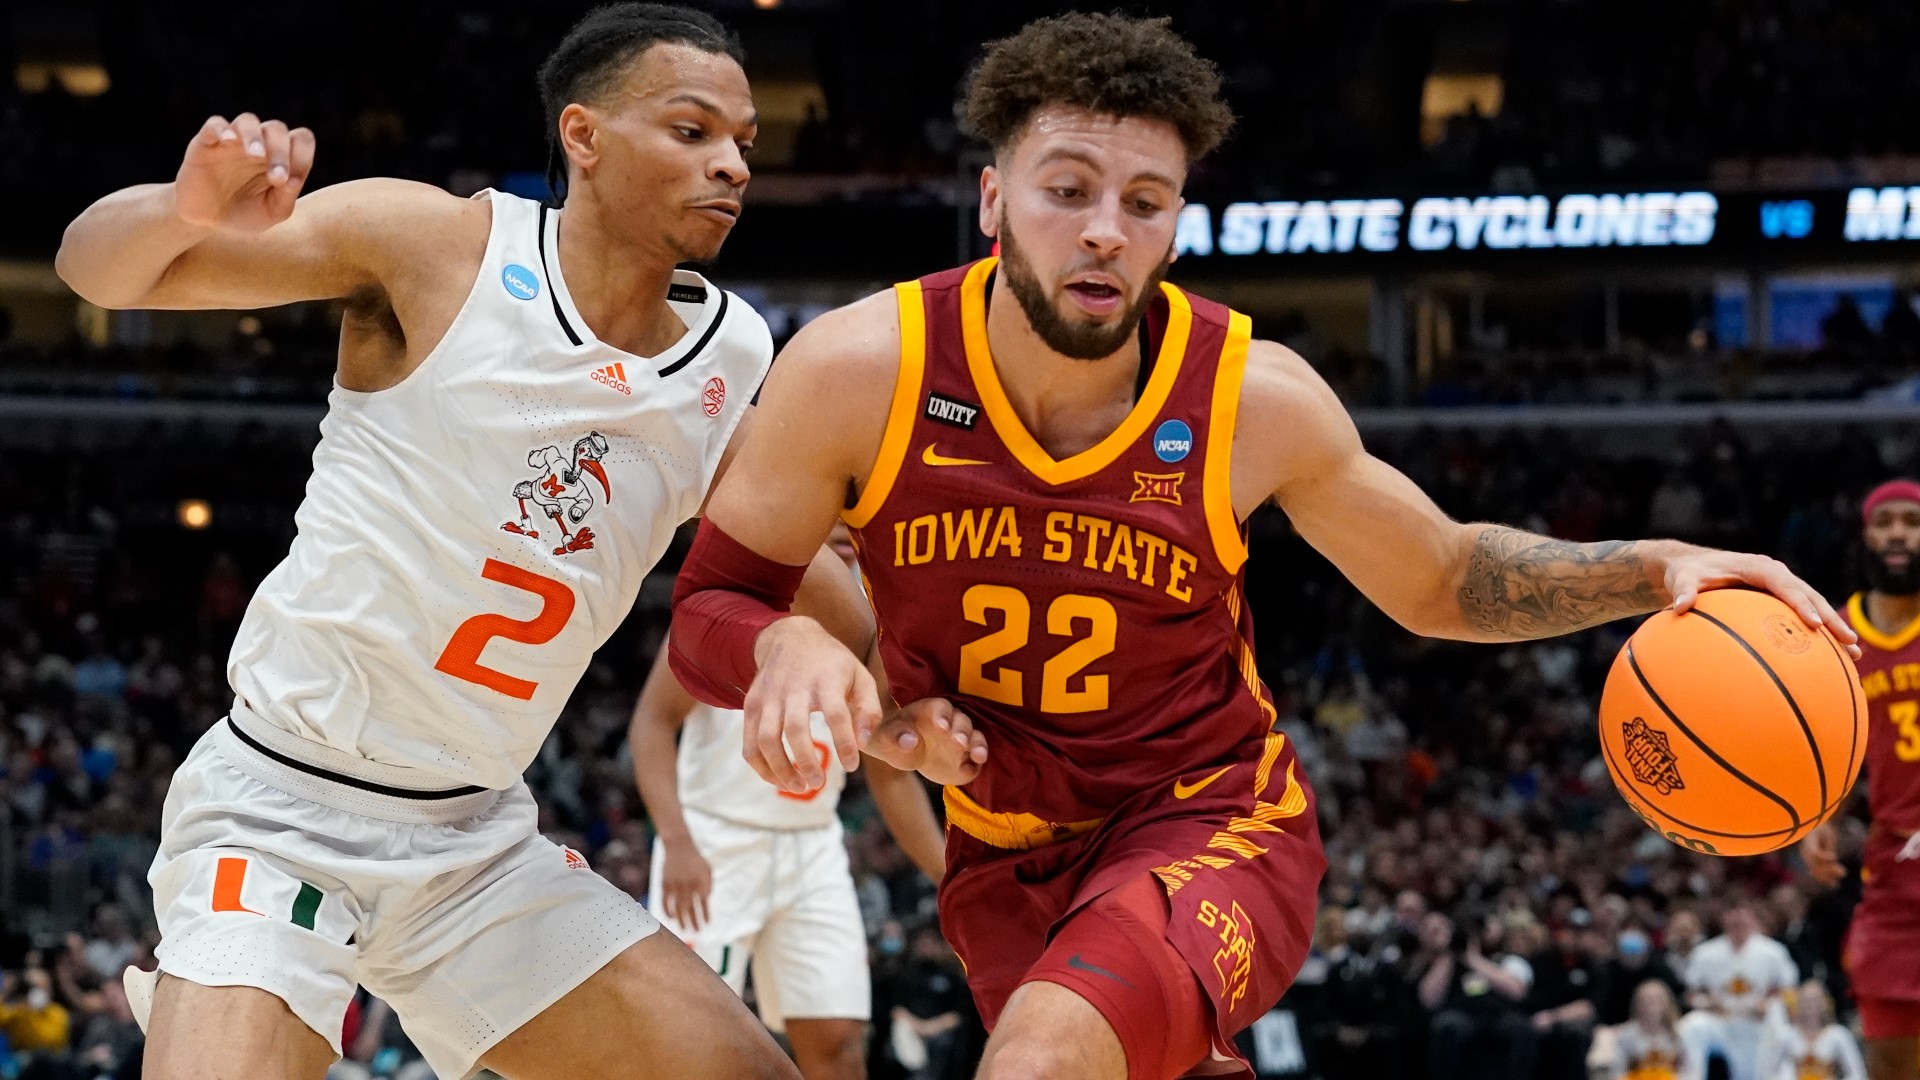 Iowa State (22-13) rode its hard-nosed defense into the Midwest Region semifinals after it had just two wins last season.